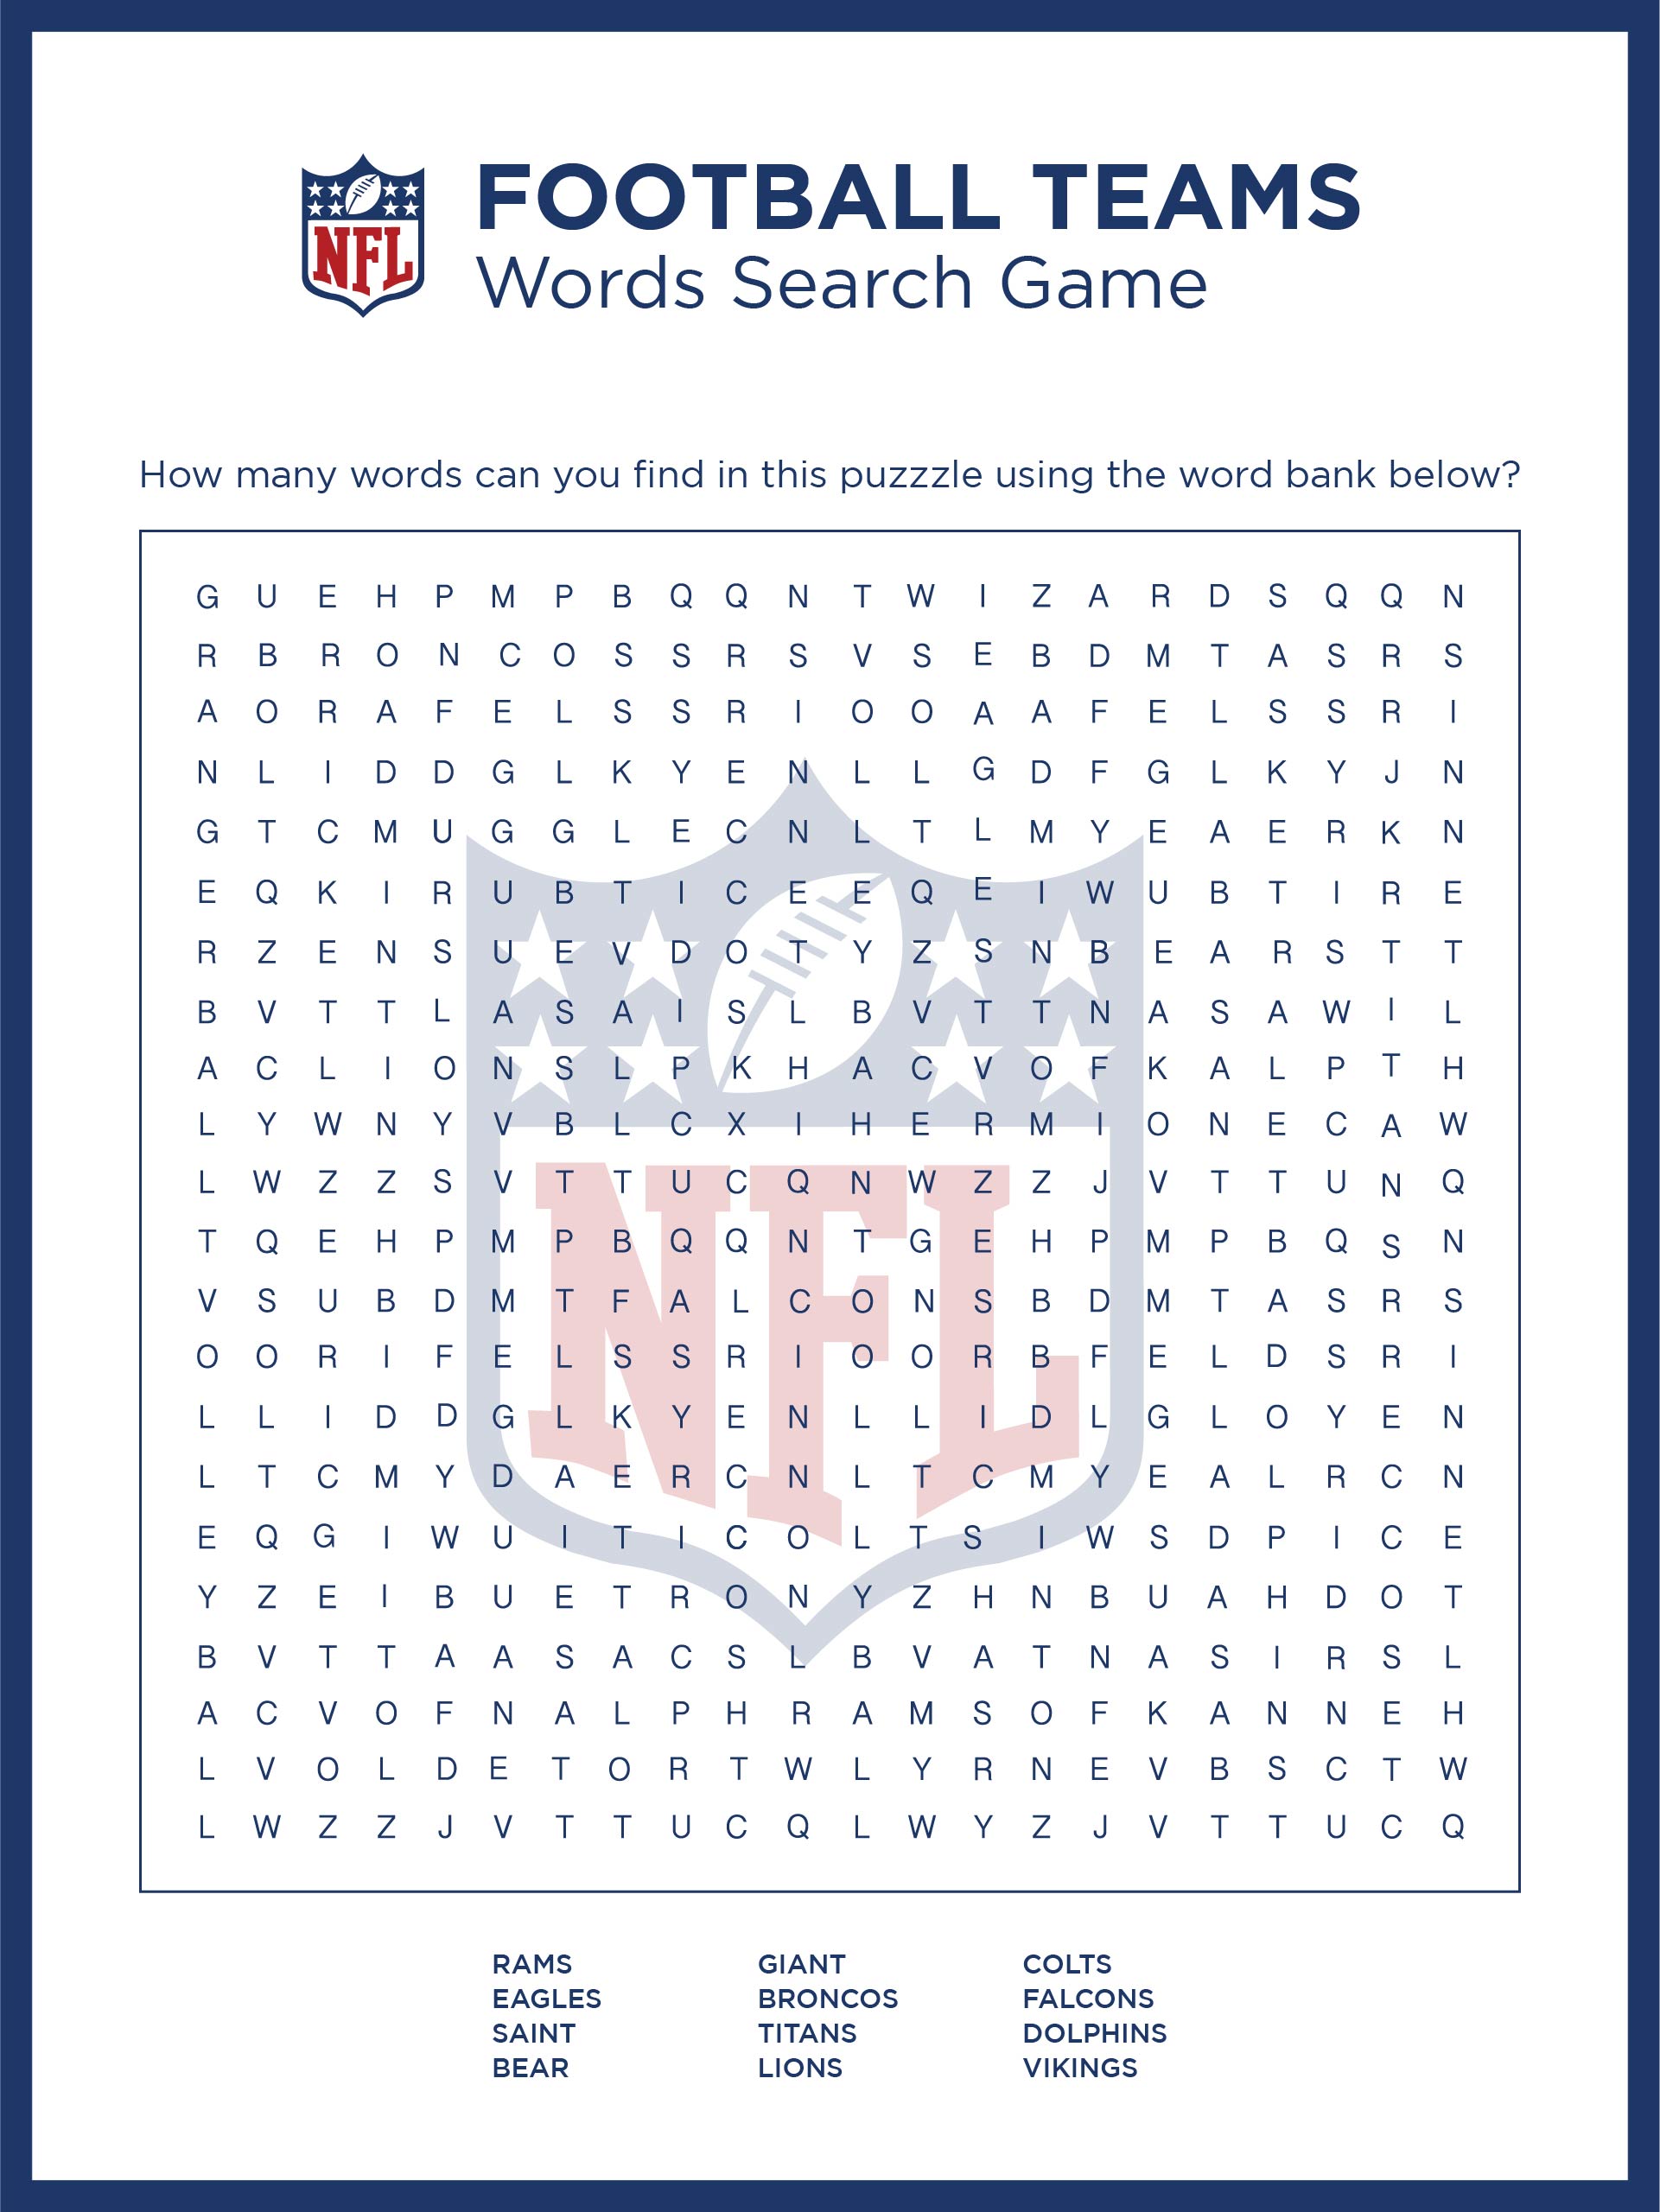 6-best-images-of-nfl-football-word-search-printable-nfl-word-search